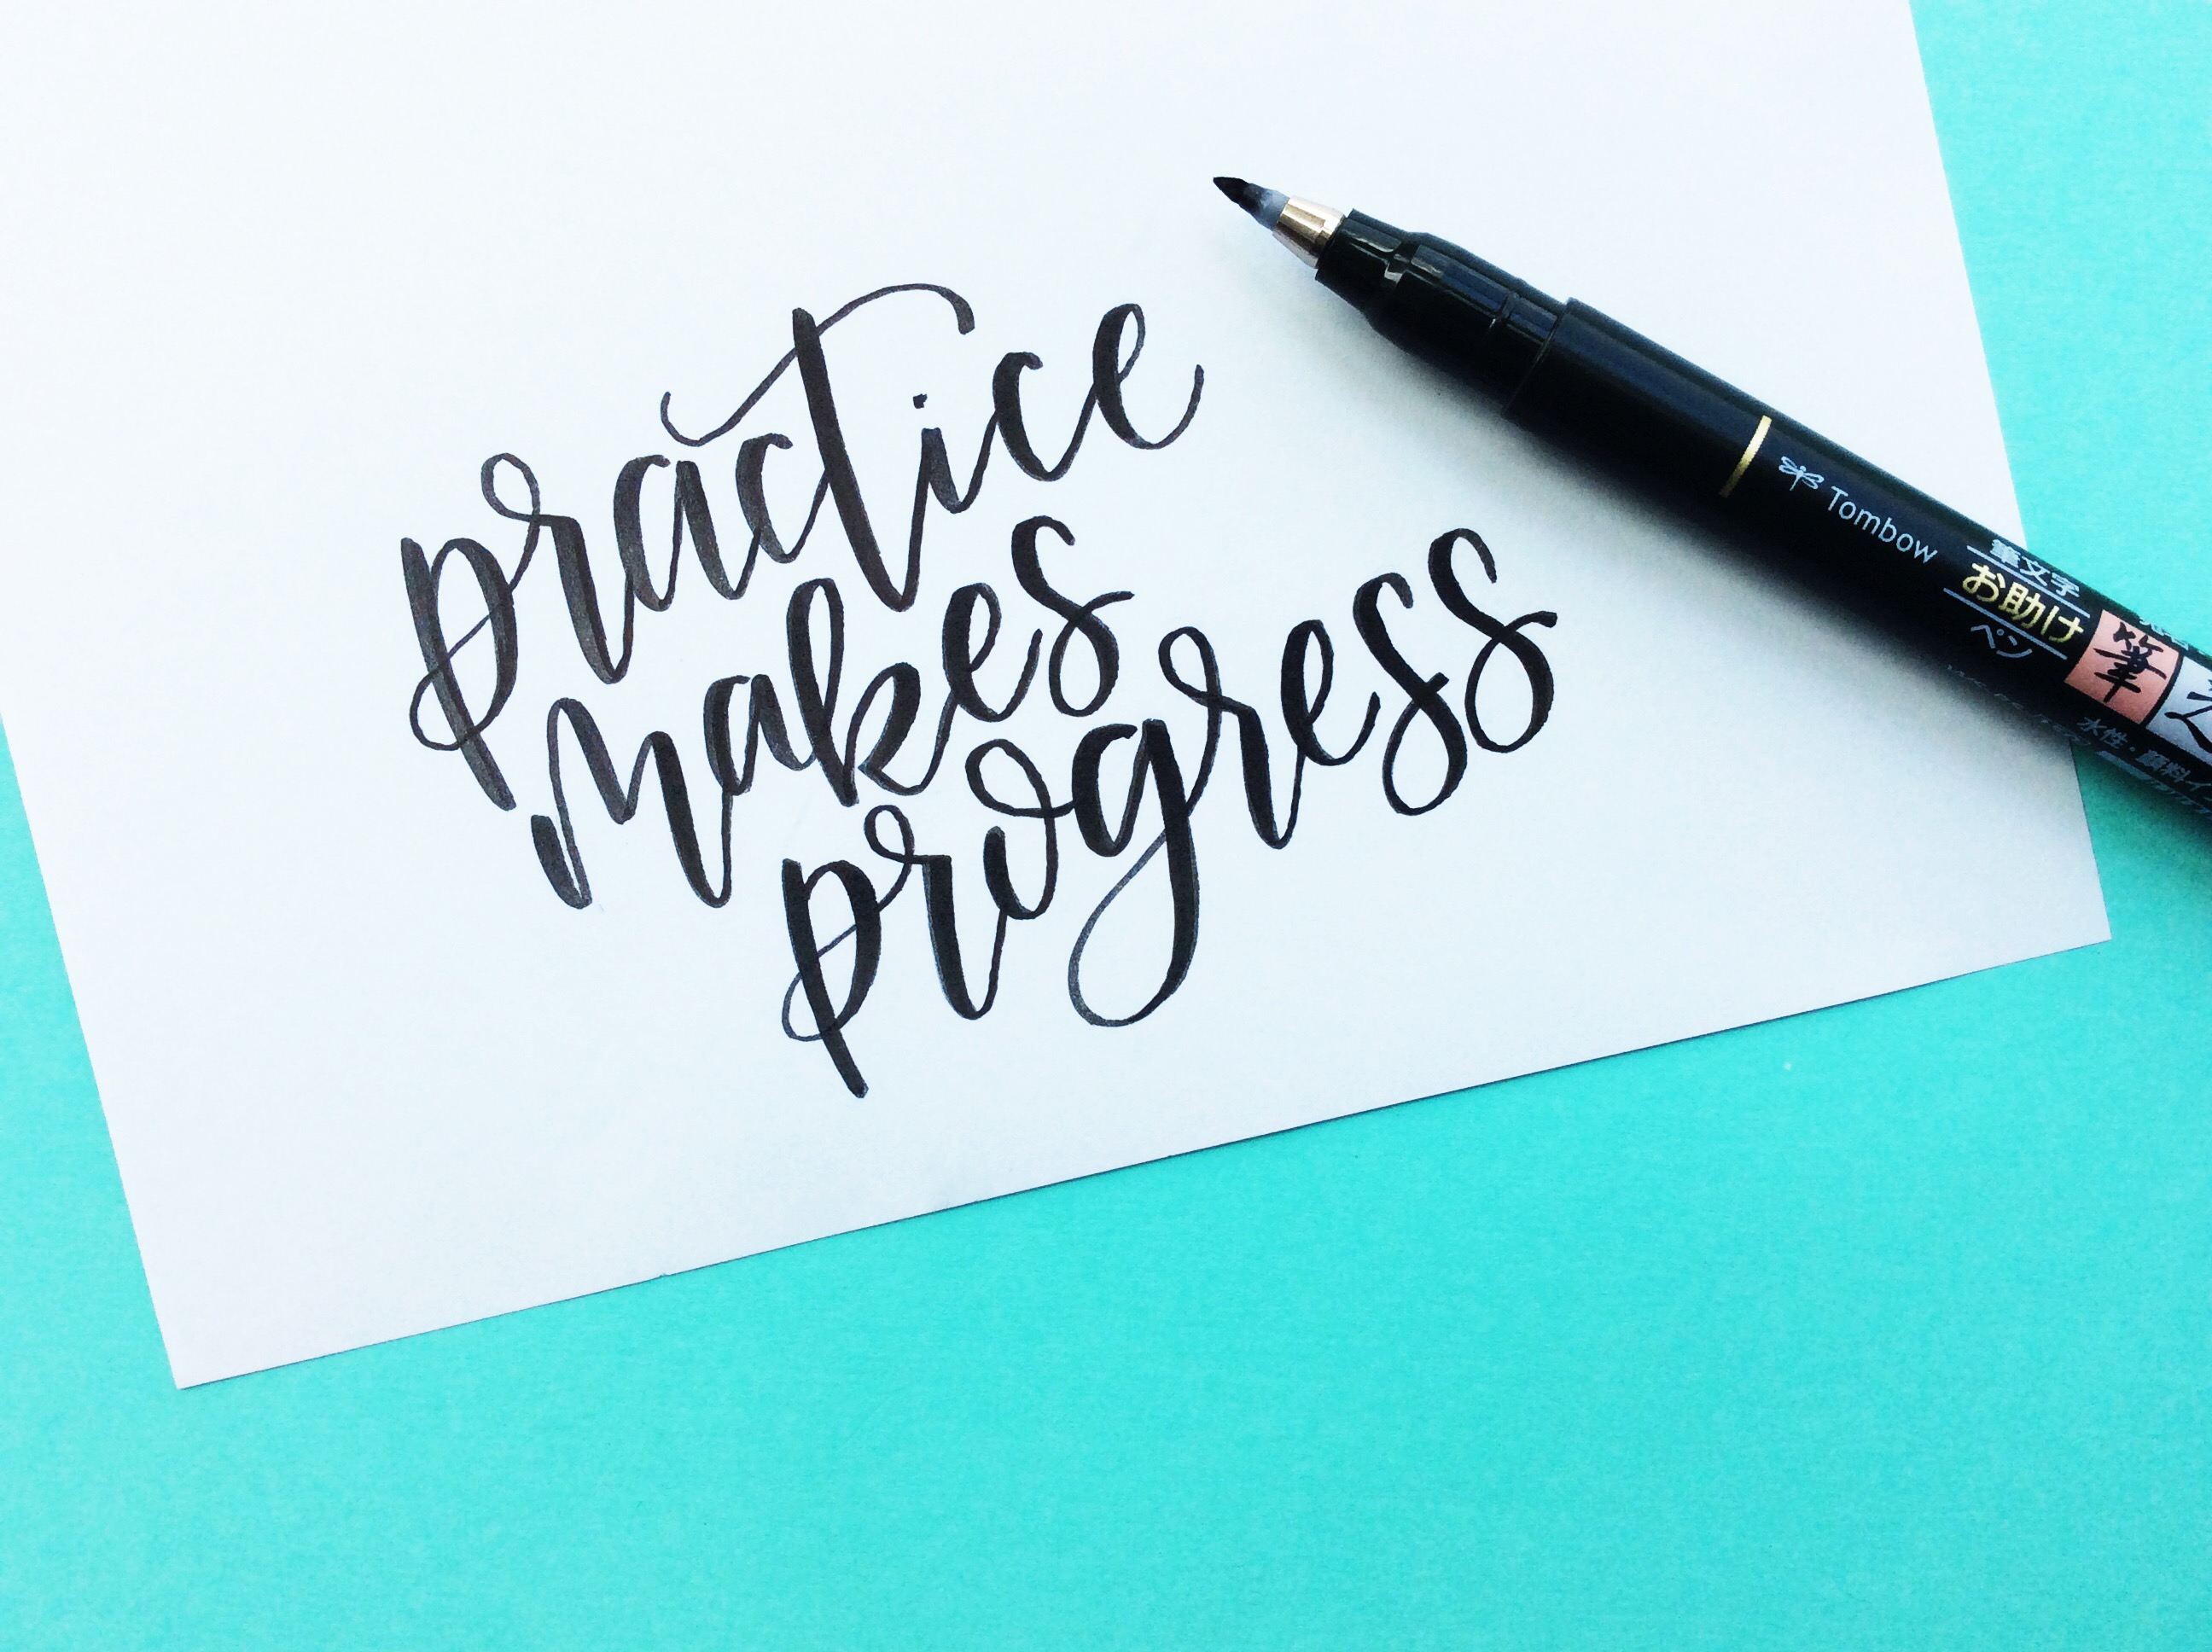 What I Use For Hand Lettering: my favorite lettering tools - Amanda  Kammarada